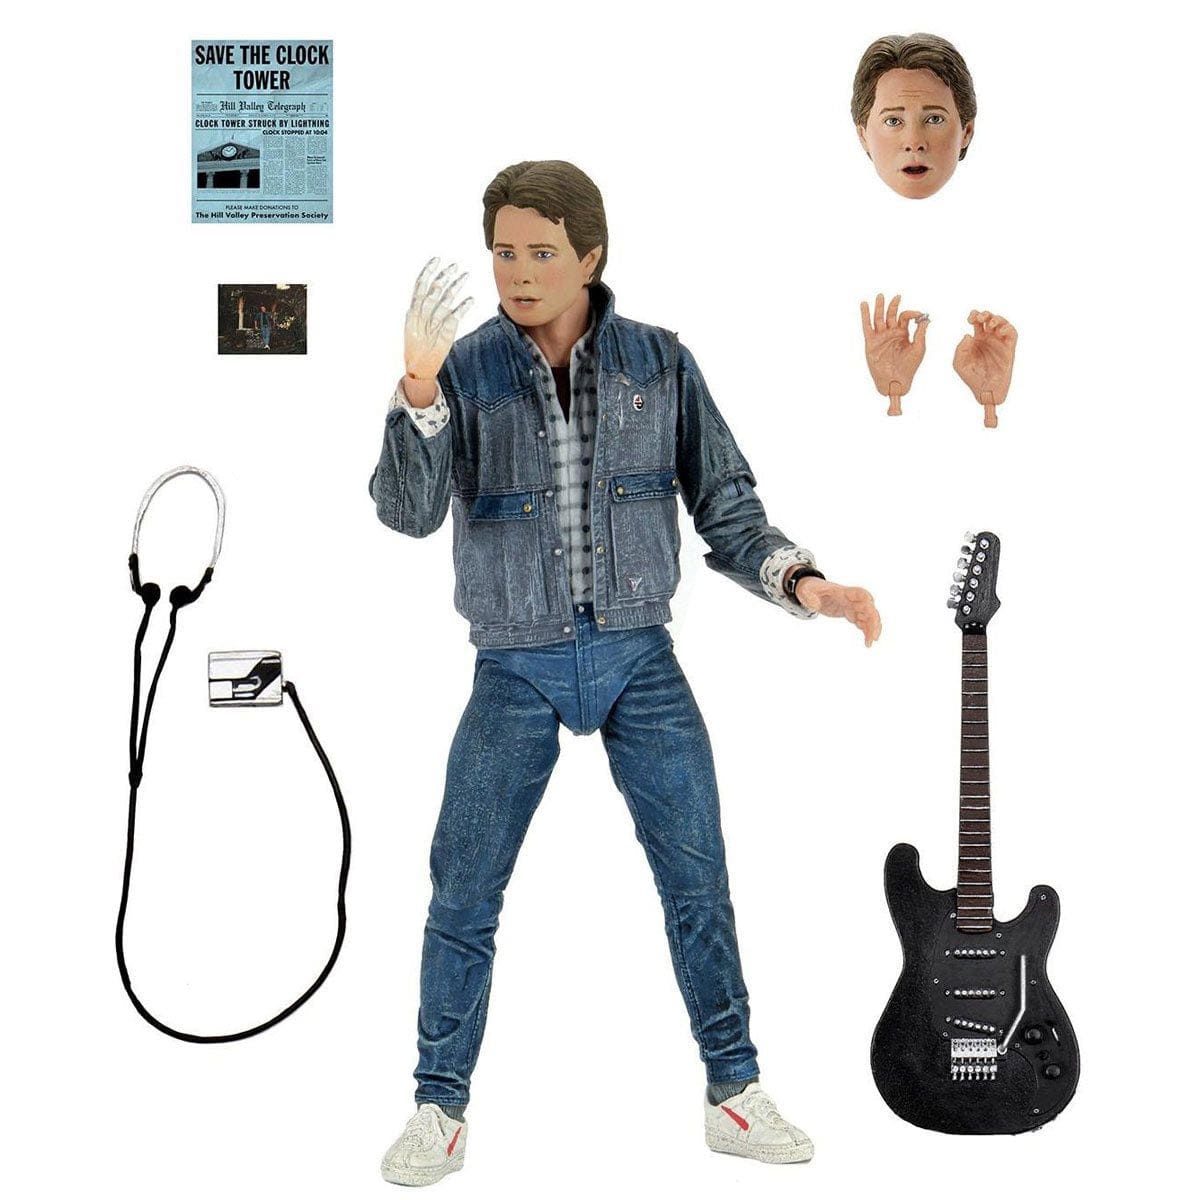 Back to the Future Ultimate Marty McFly 1985 Audition 7-Inch Scale Action Figure